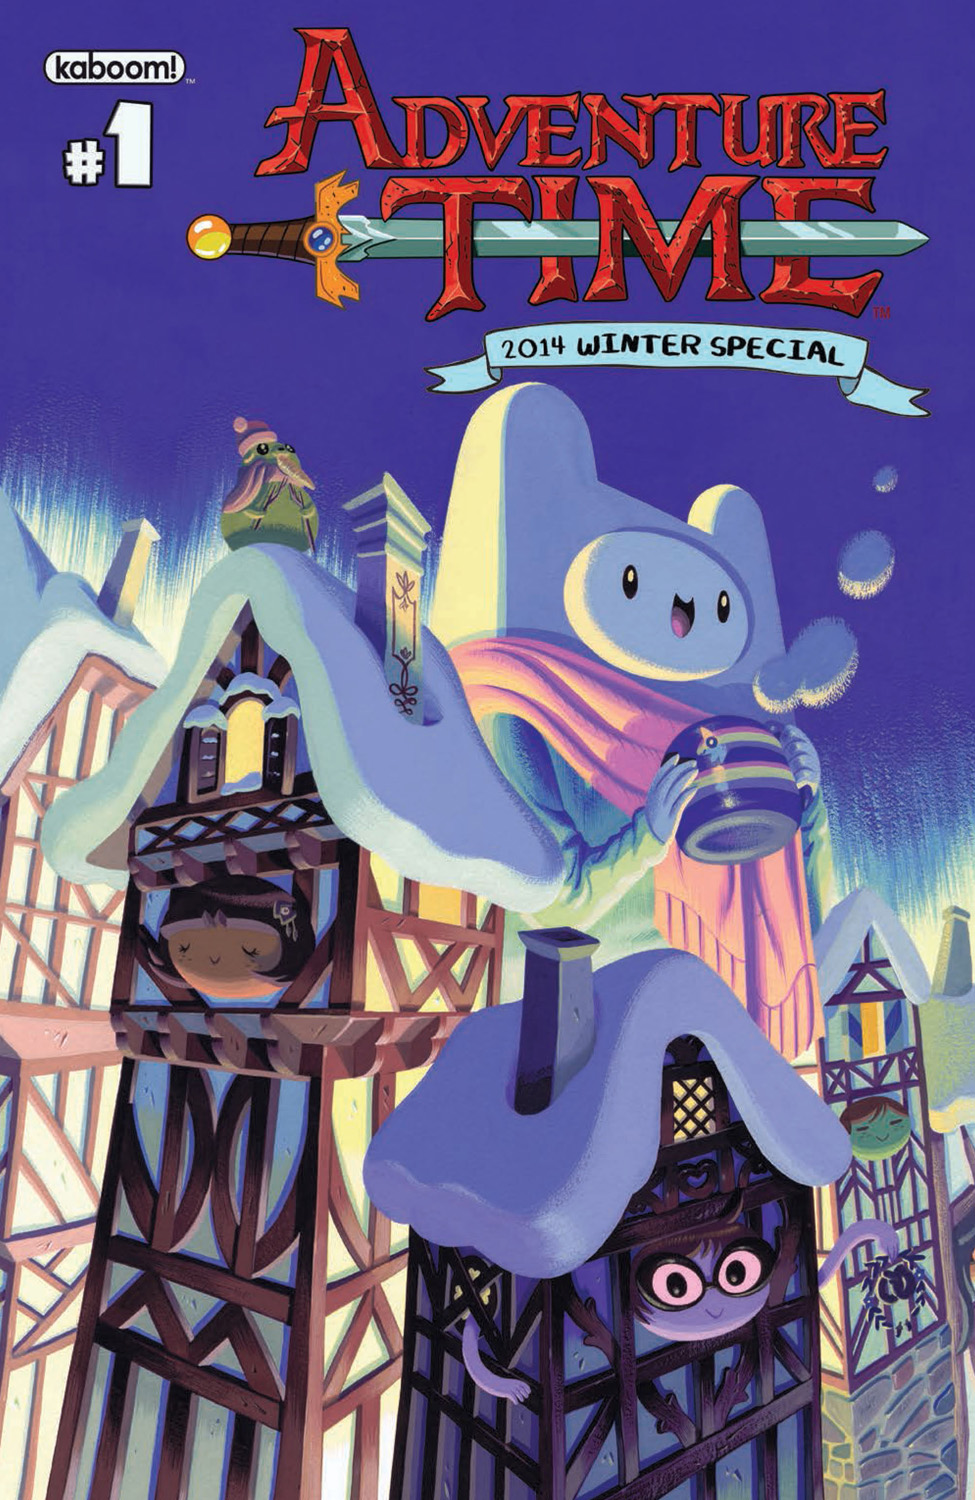 Adventure Time Winter Special 2014 Adventure Time Wiki